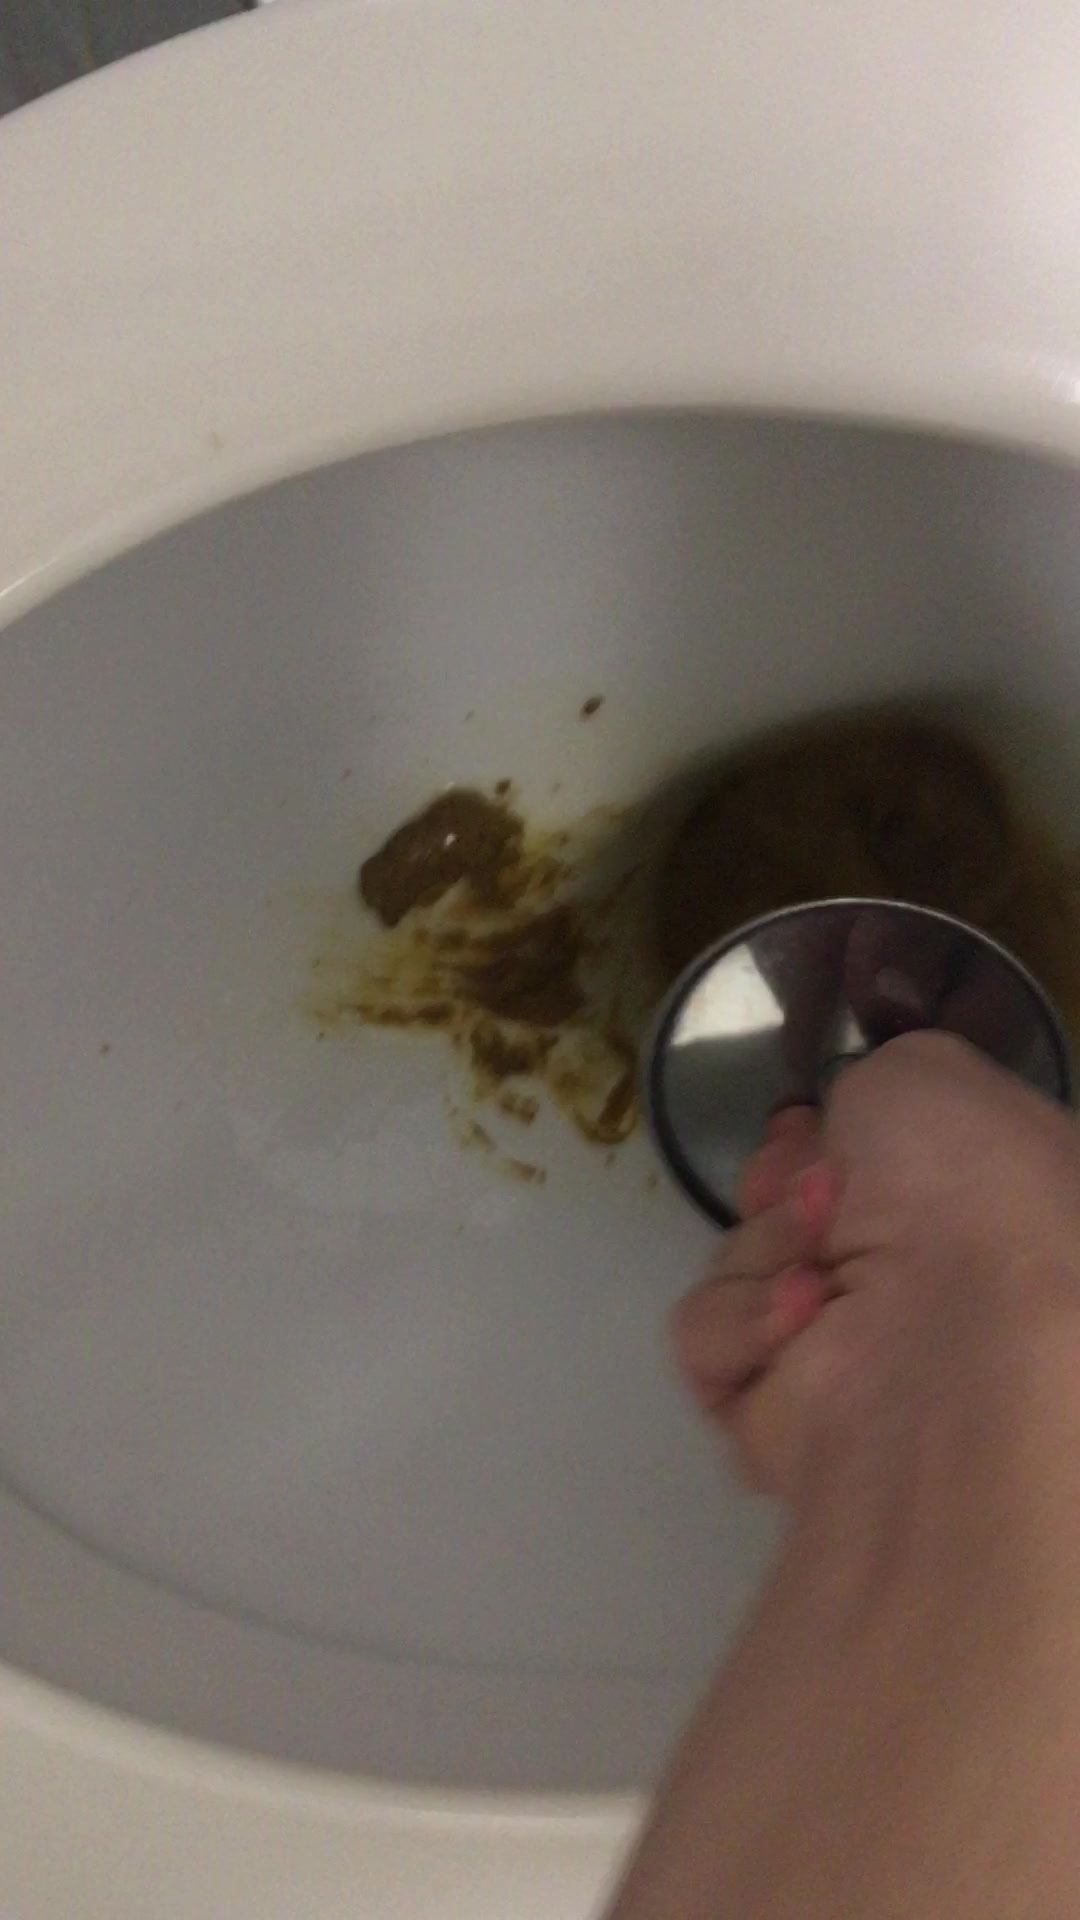 (ABSOLUTELY DISGUSTING) trying to unclog my messy toilet after big shit